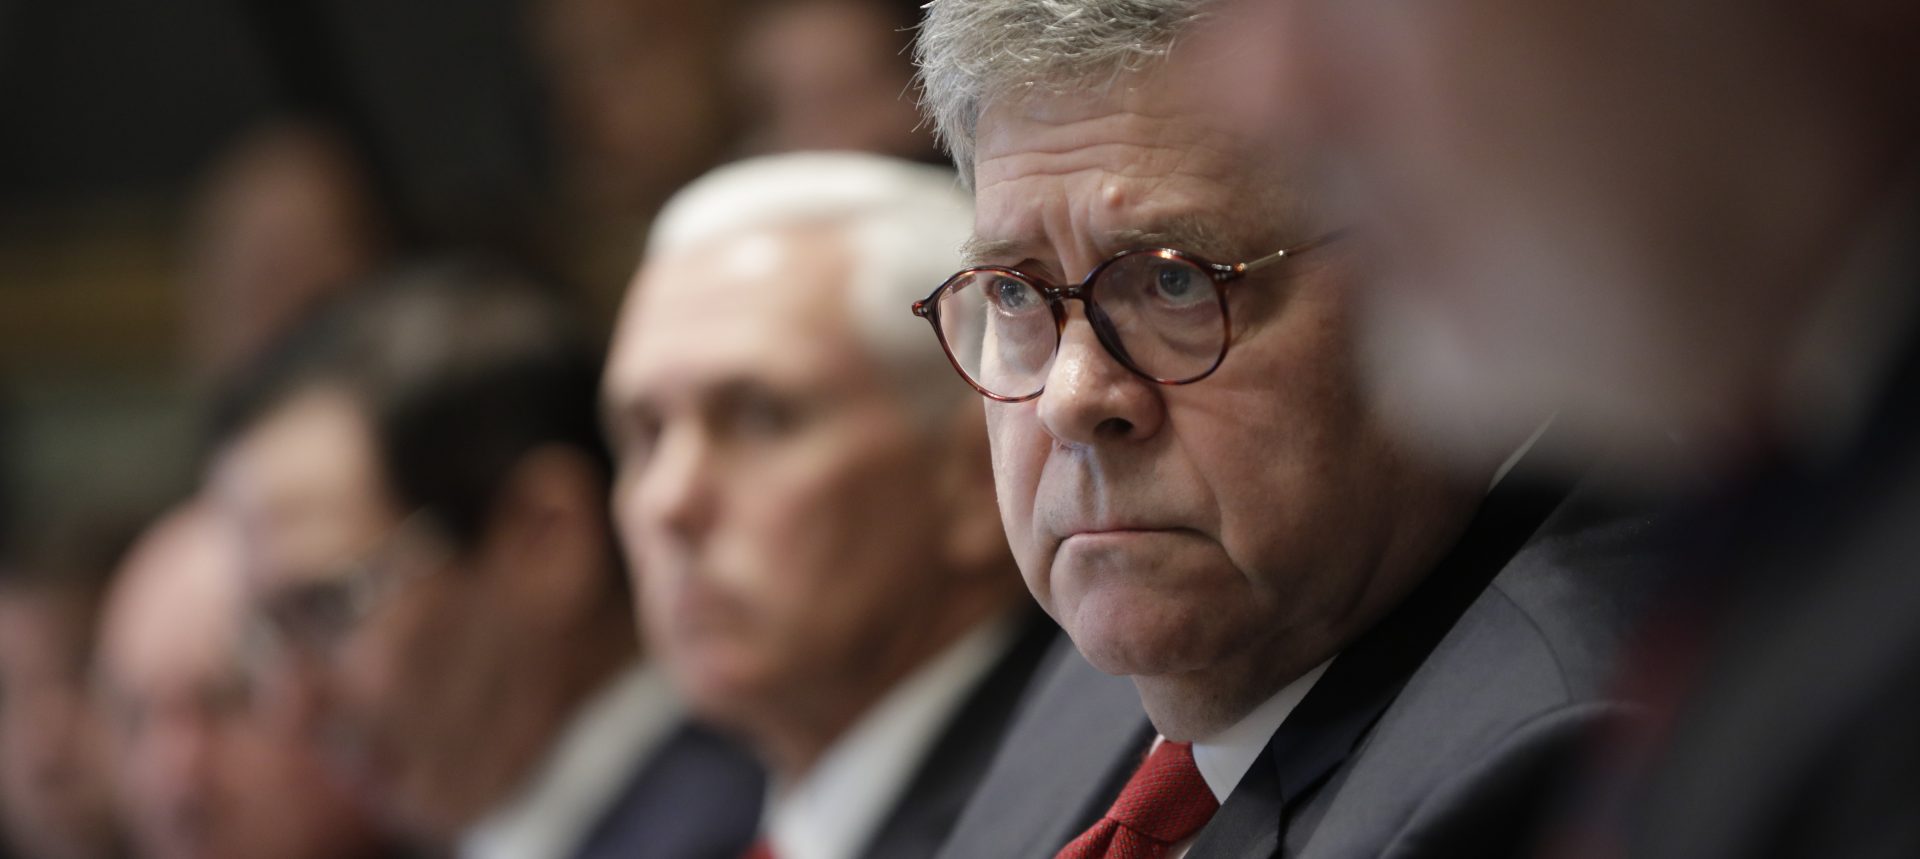 Attorney General William Barr, center, and Vice President Mike Pence, left of Barr, attend a Cabinet meeting in the Cabinet Room of the White House, Monday, Oct. 21, 2019, in Washington.